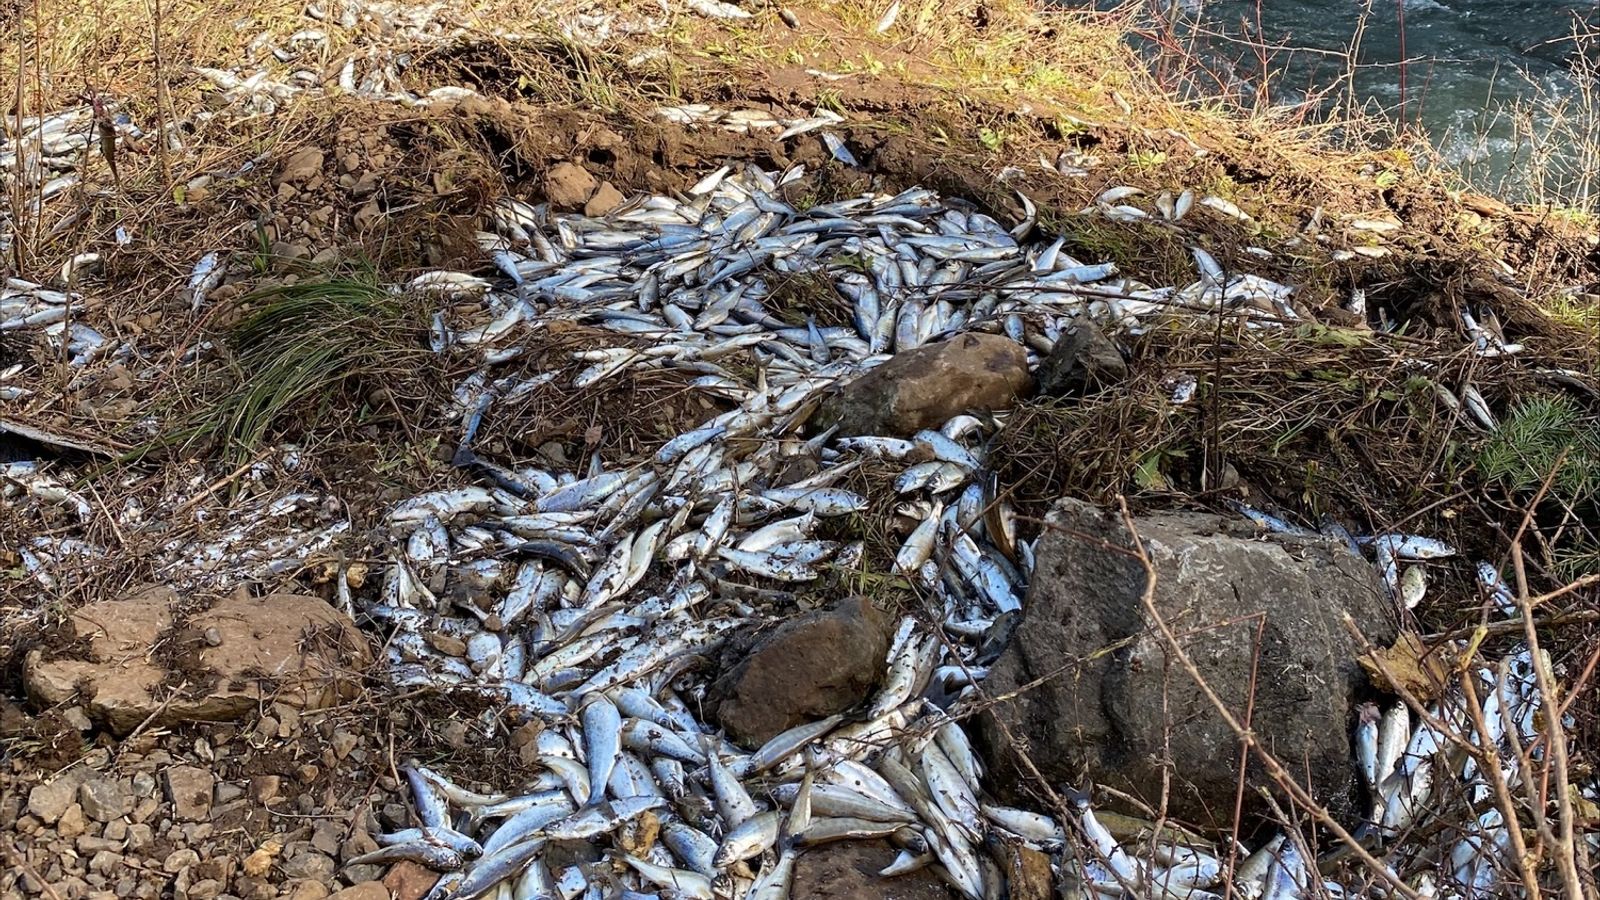 100,000 live salmon spill out of tanker truck - with 77,000 landing in a nearby creek